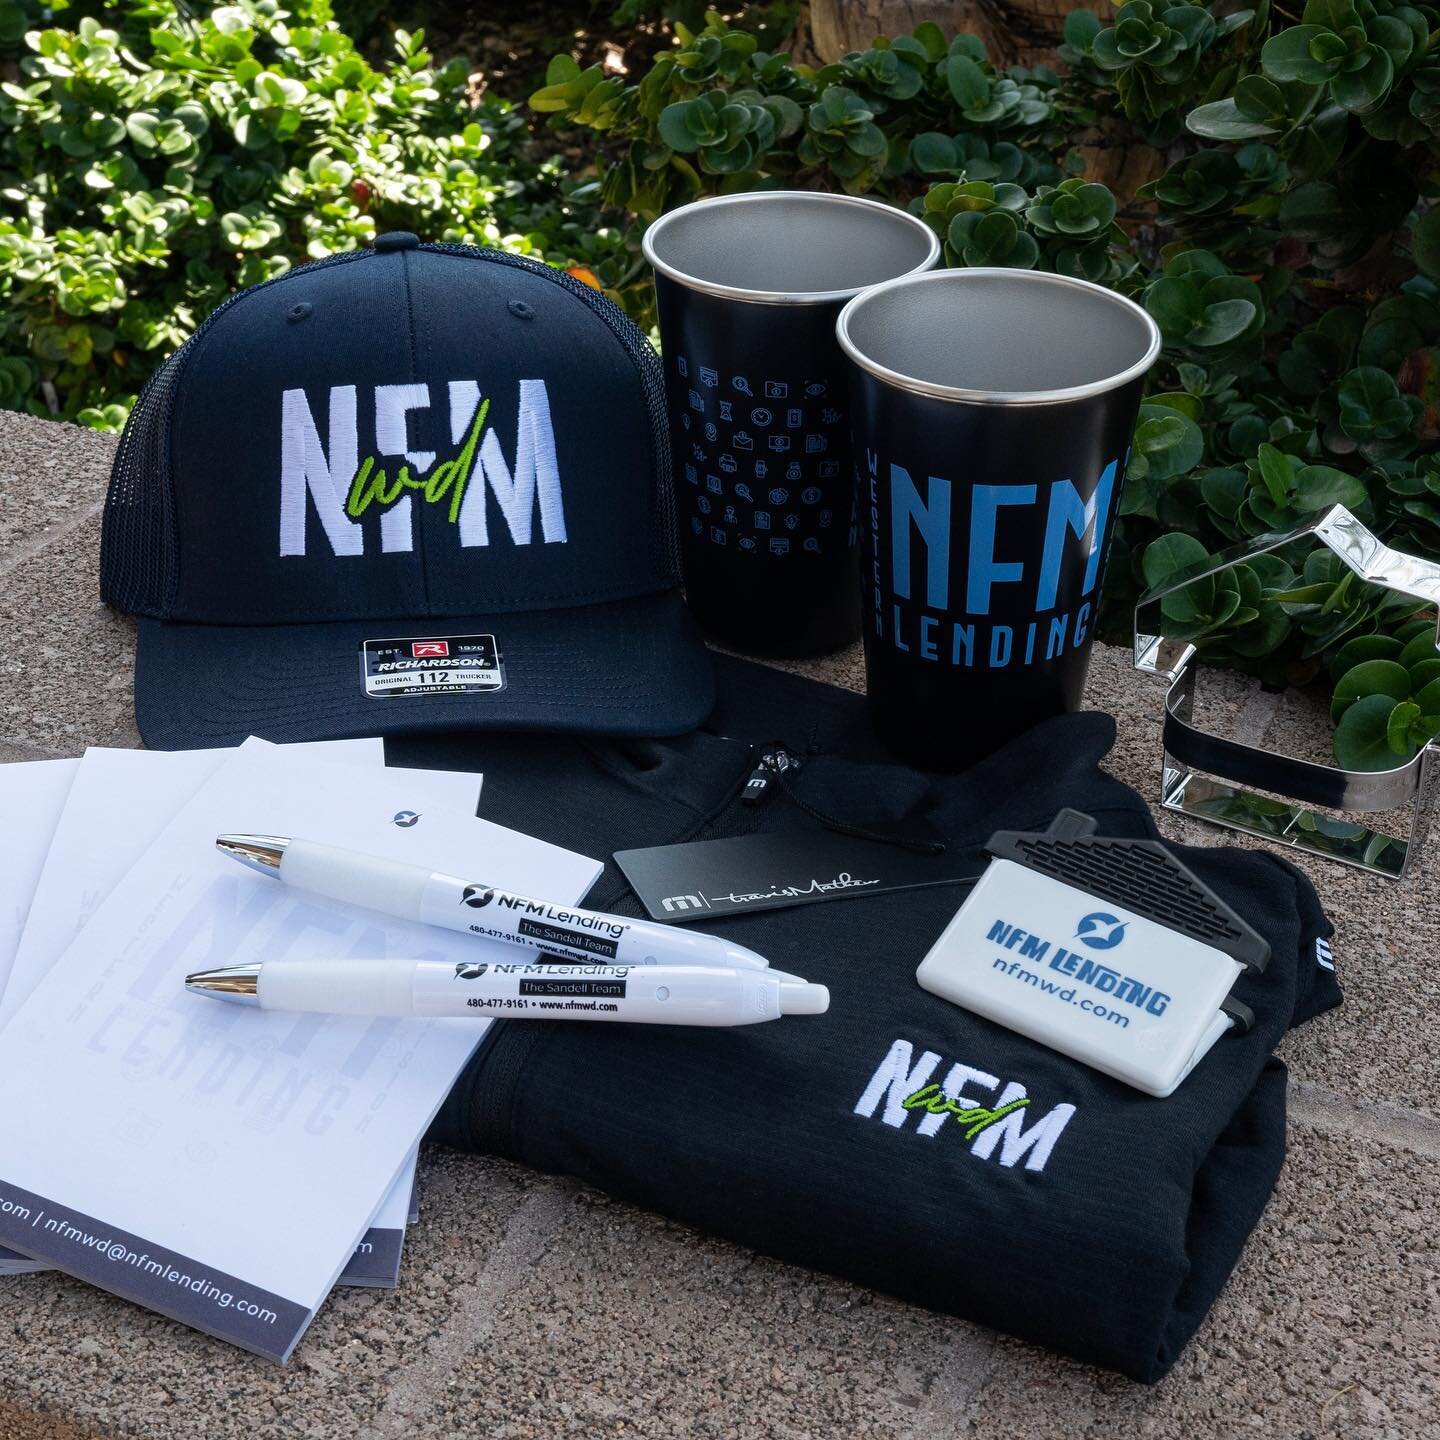 Custom embroidered @travismathew polos, stainless steel insulated pint cups, note pads, house shaped cookie cutters, and chip clips for our friends at NFM Lending 👌🏻🔥